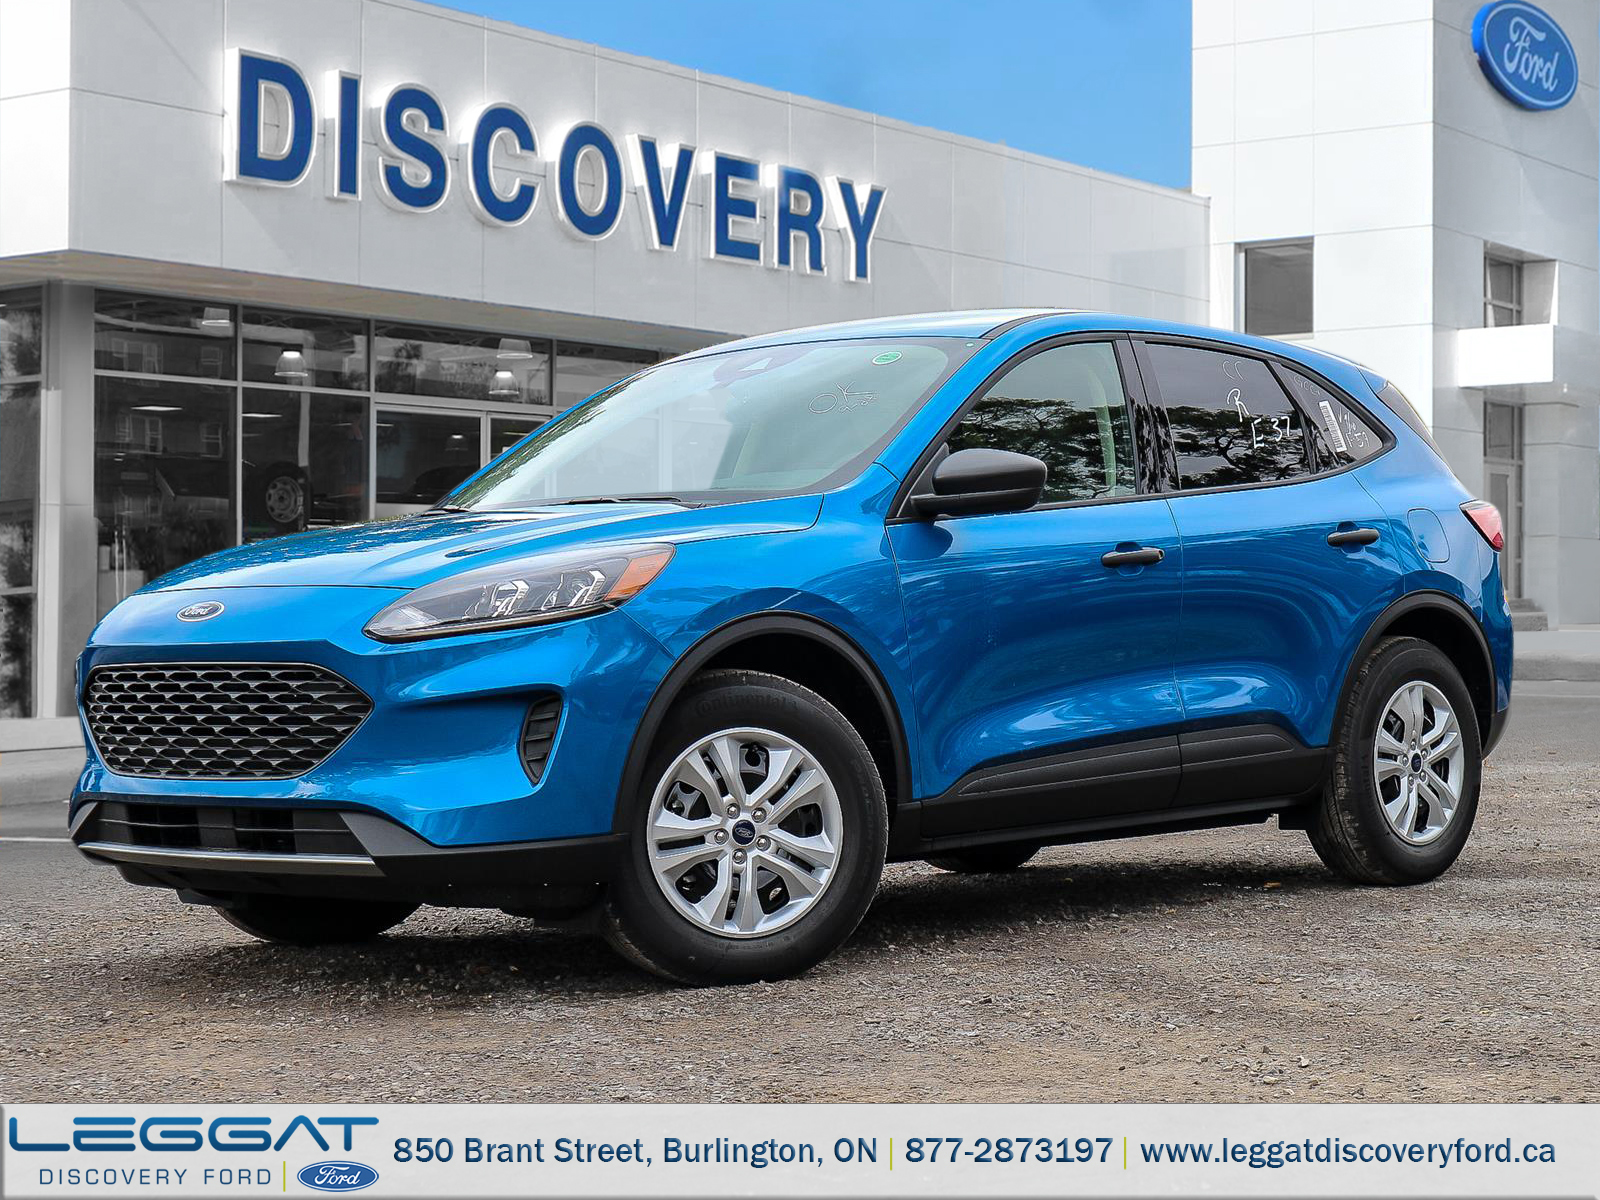 Leggat Discovery Ford 2020 Ford Escape S Velocity Blue